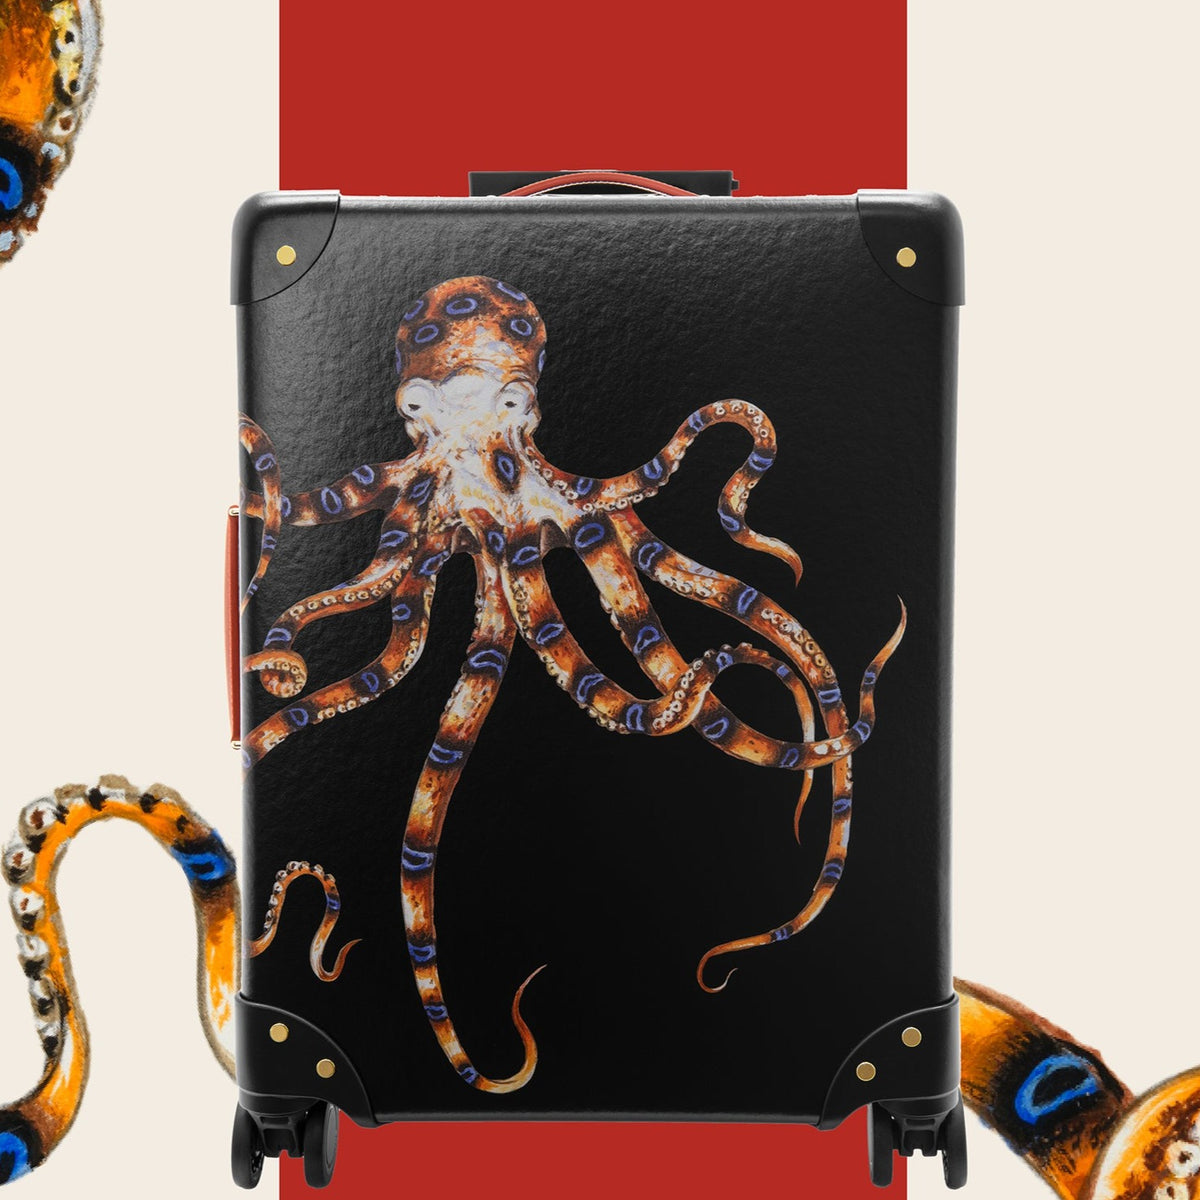 James Bond Carry-On Trolley Case - Octopussy Edition - By Globe-Trotter